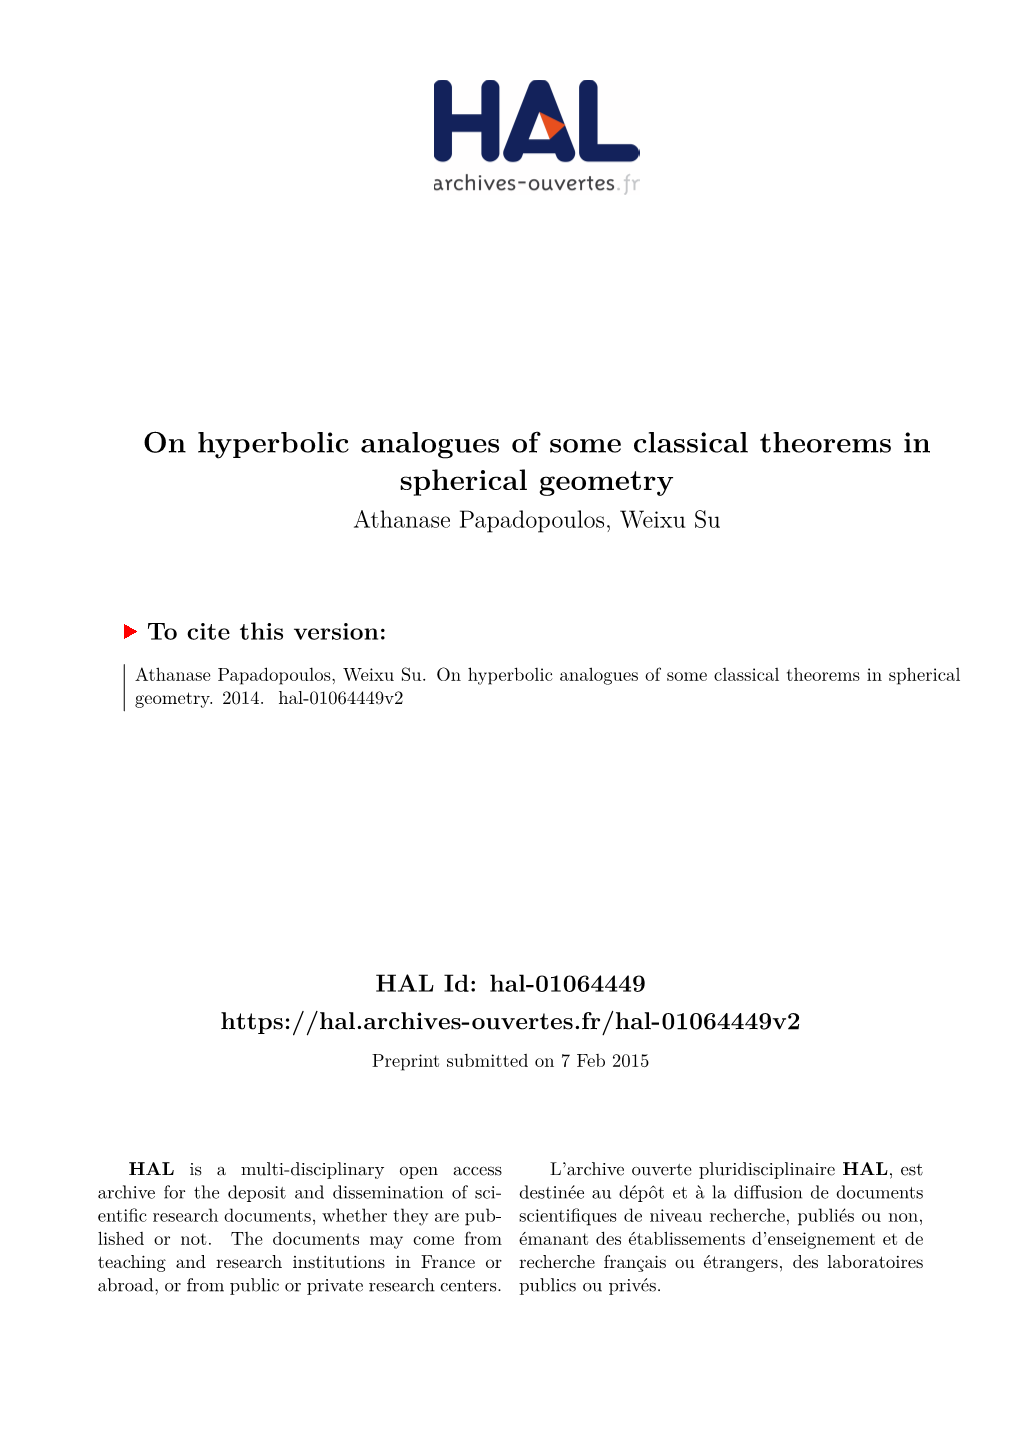 On Hyperbolic Analogues of Some Classical Theorems in Spherical Geometry Athanase Papadopoulos, Weixu Su